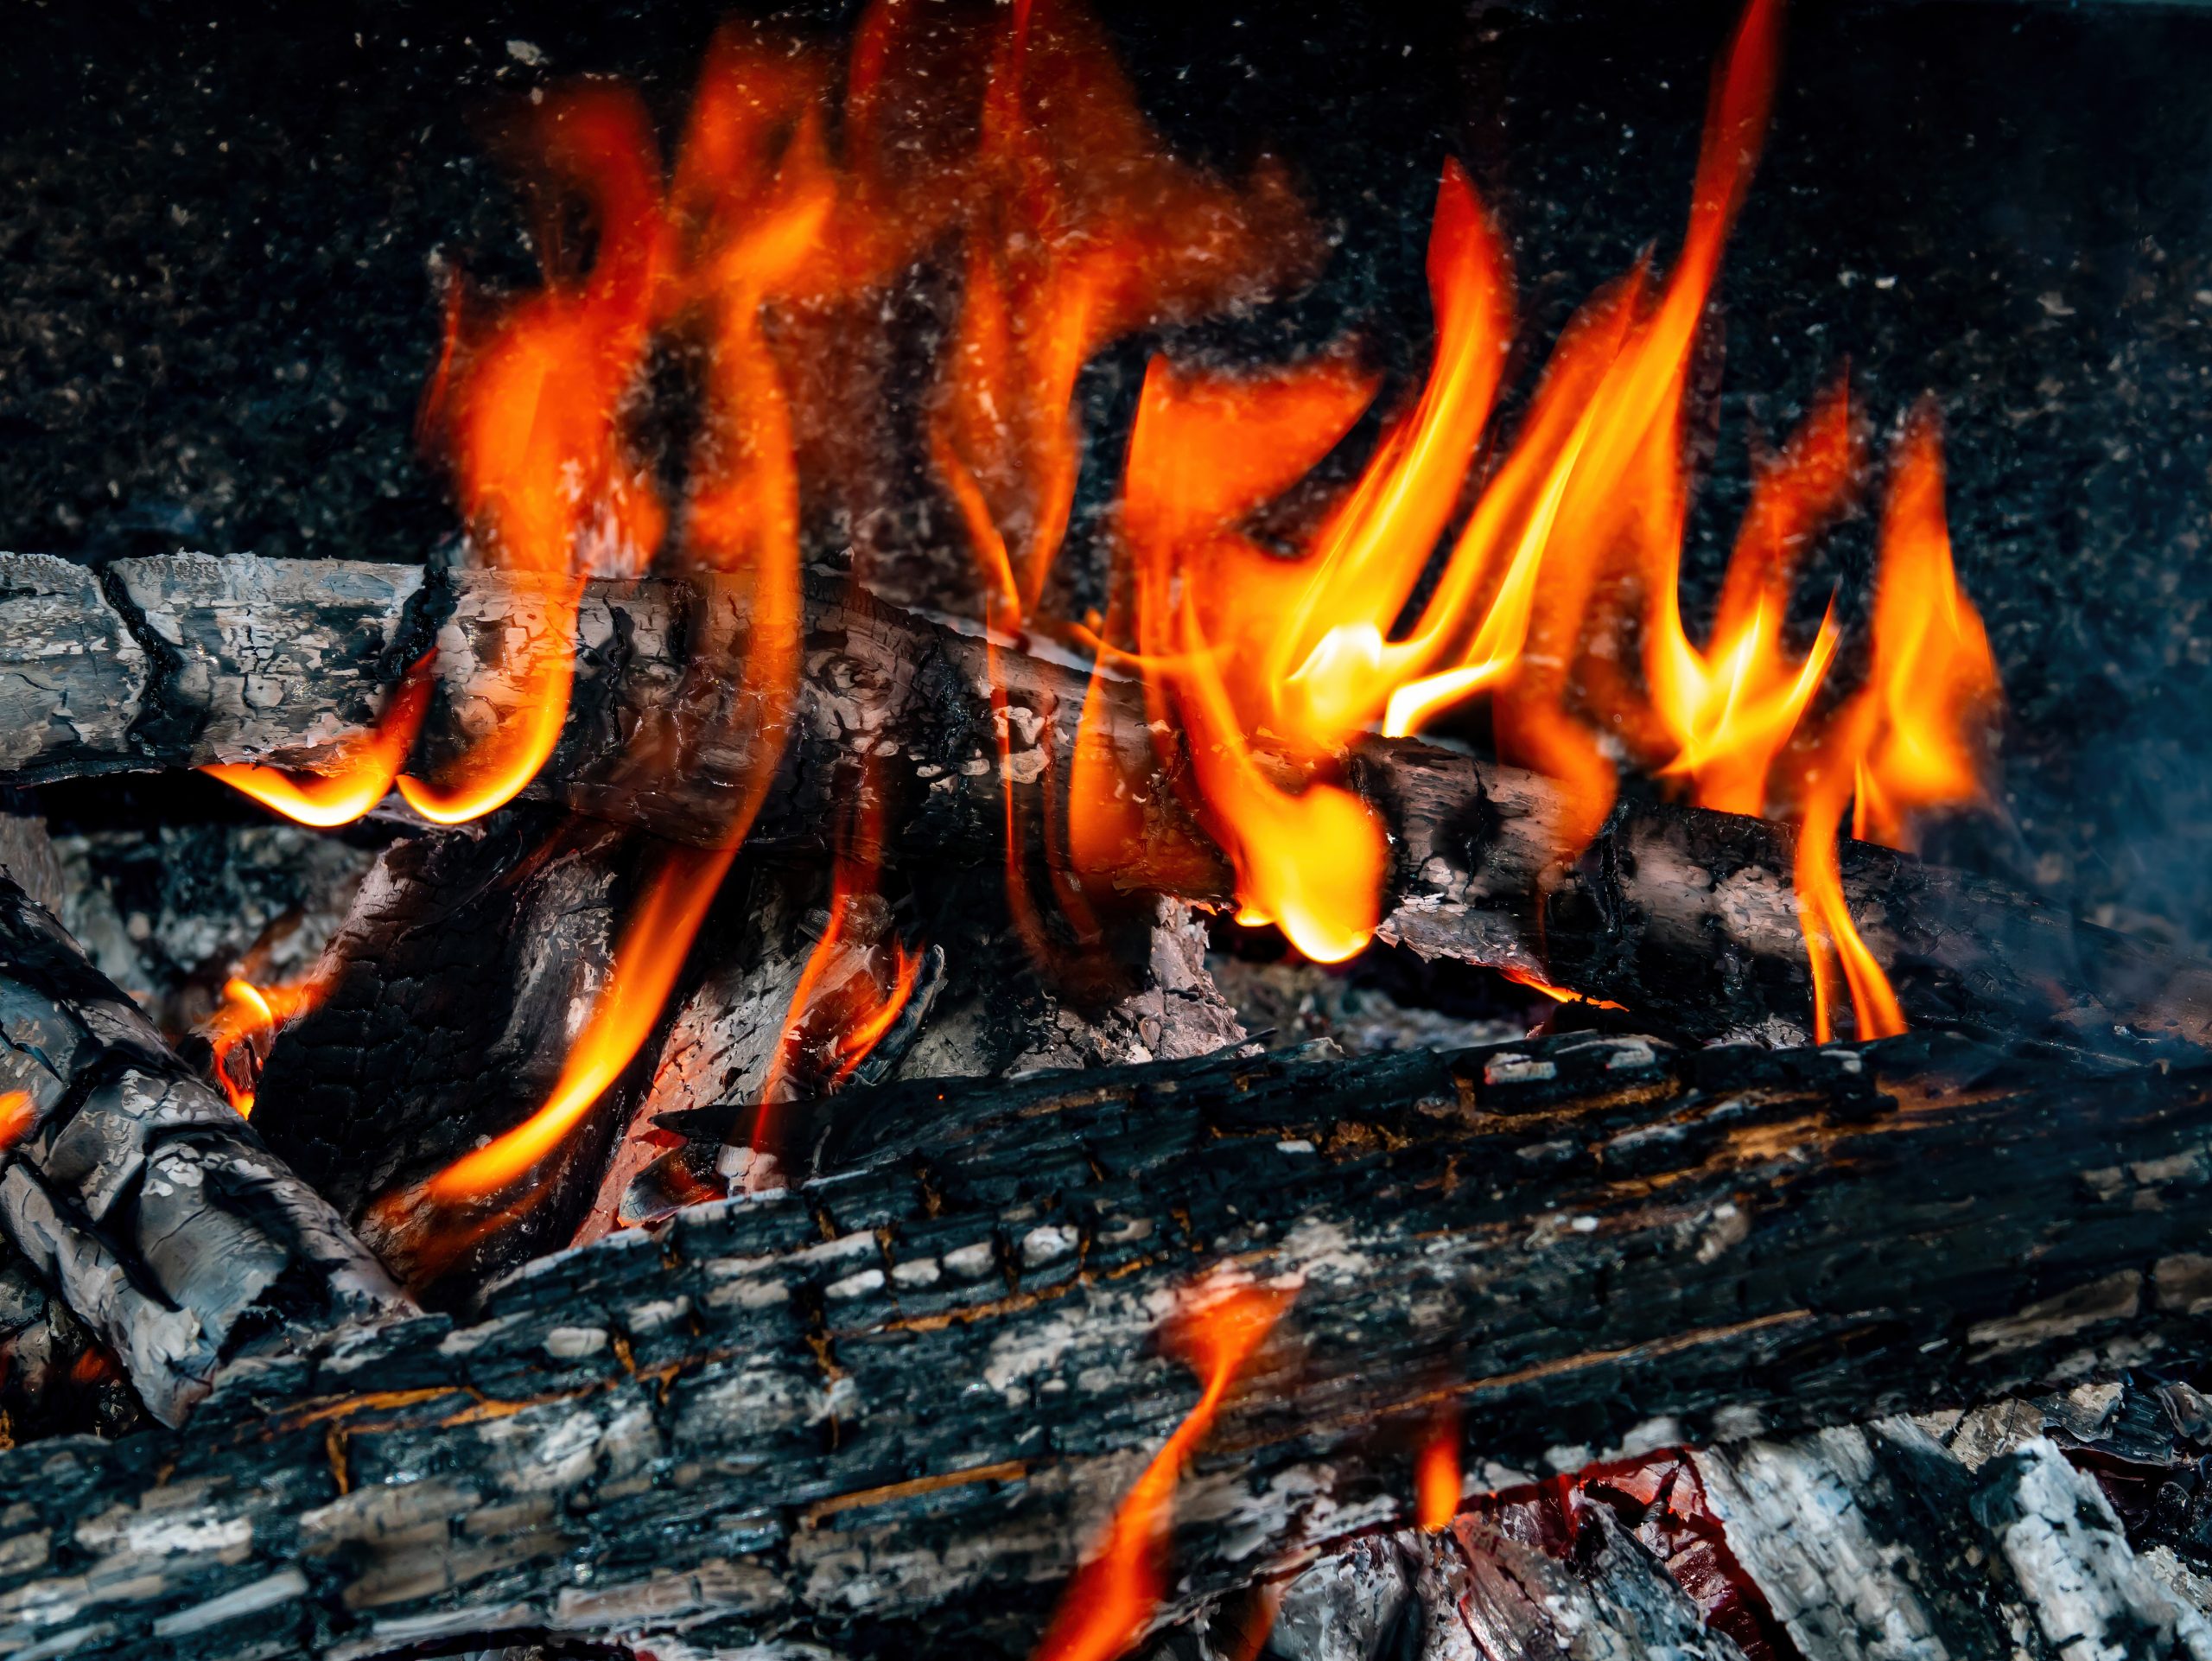 A photograph of a controlled fire used for cooking. YAYIMAGES.